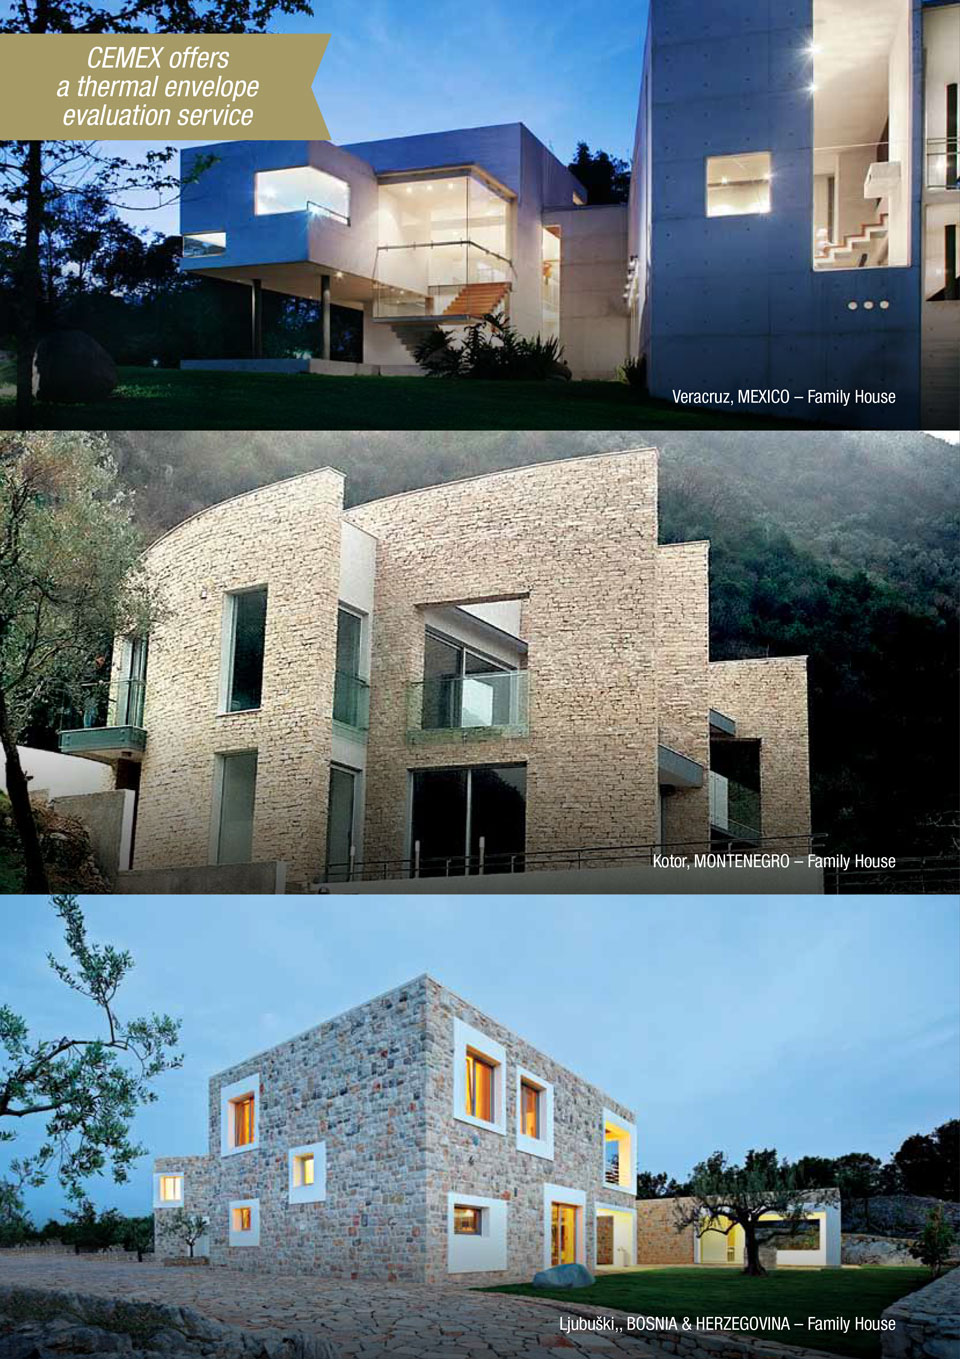 An image showing some of the projects CEMEX has done with the Energy Efficient Housing solution.